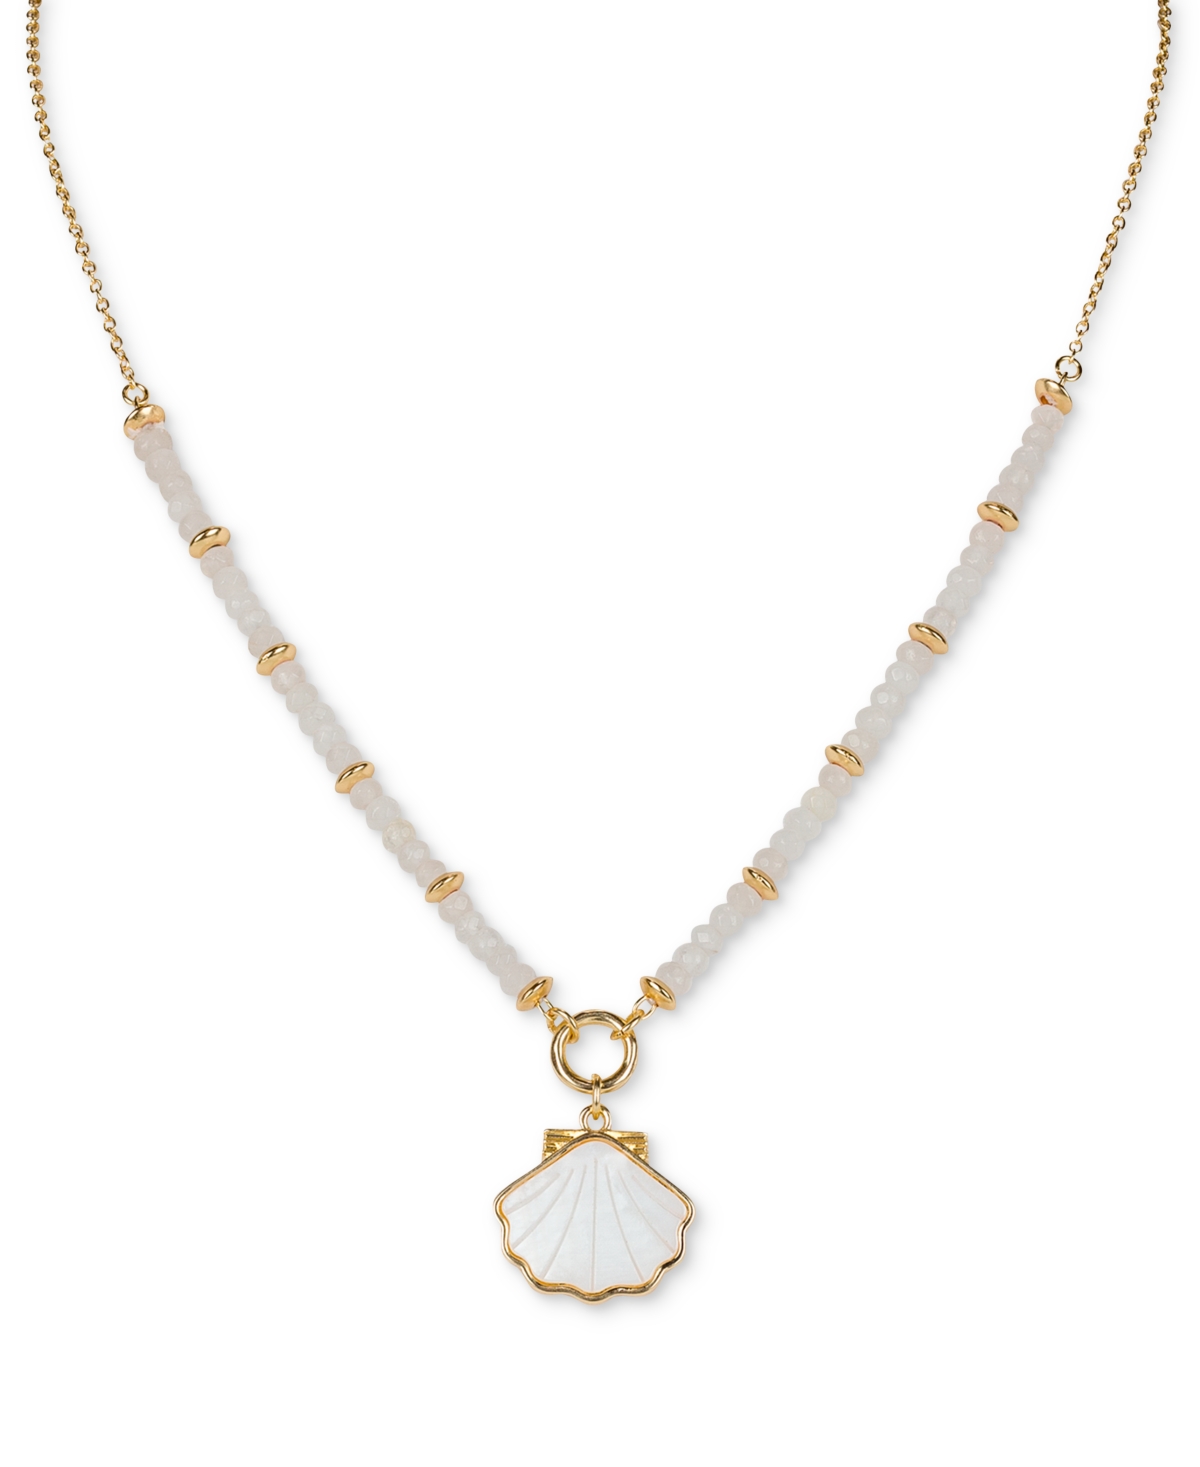 Gold-Tone Mother-of-Pearl Shell Beaded Pendant Necklace, 18" + 3" extender - Matte Gold